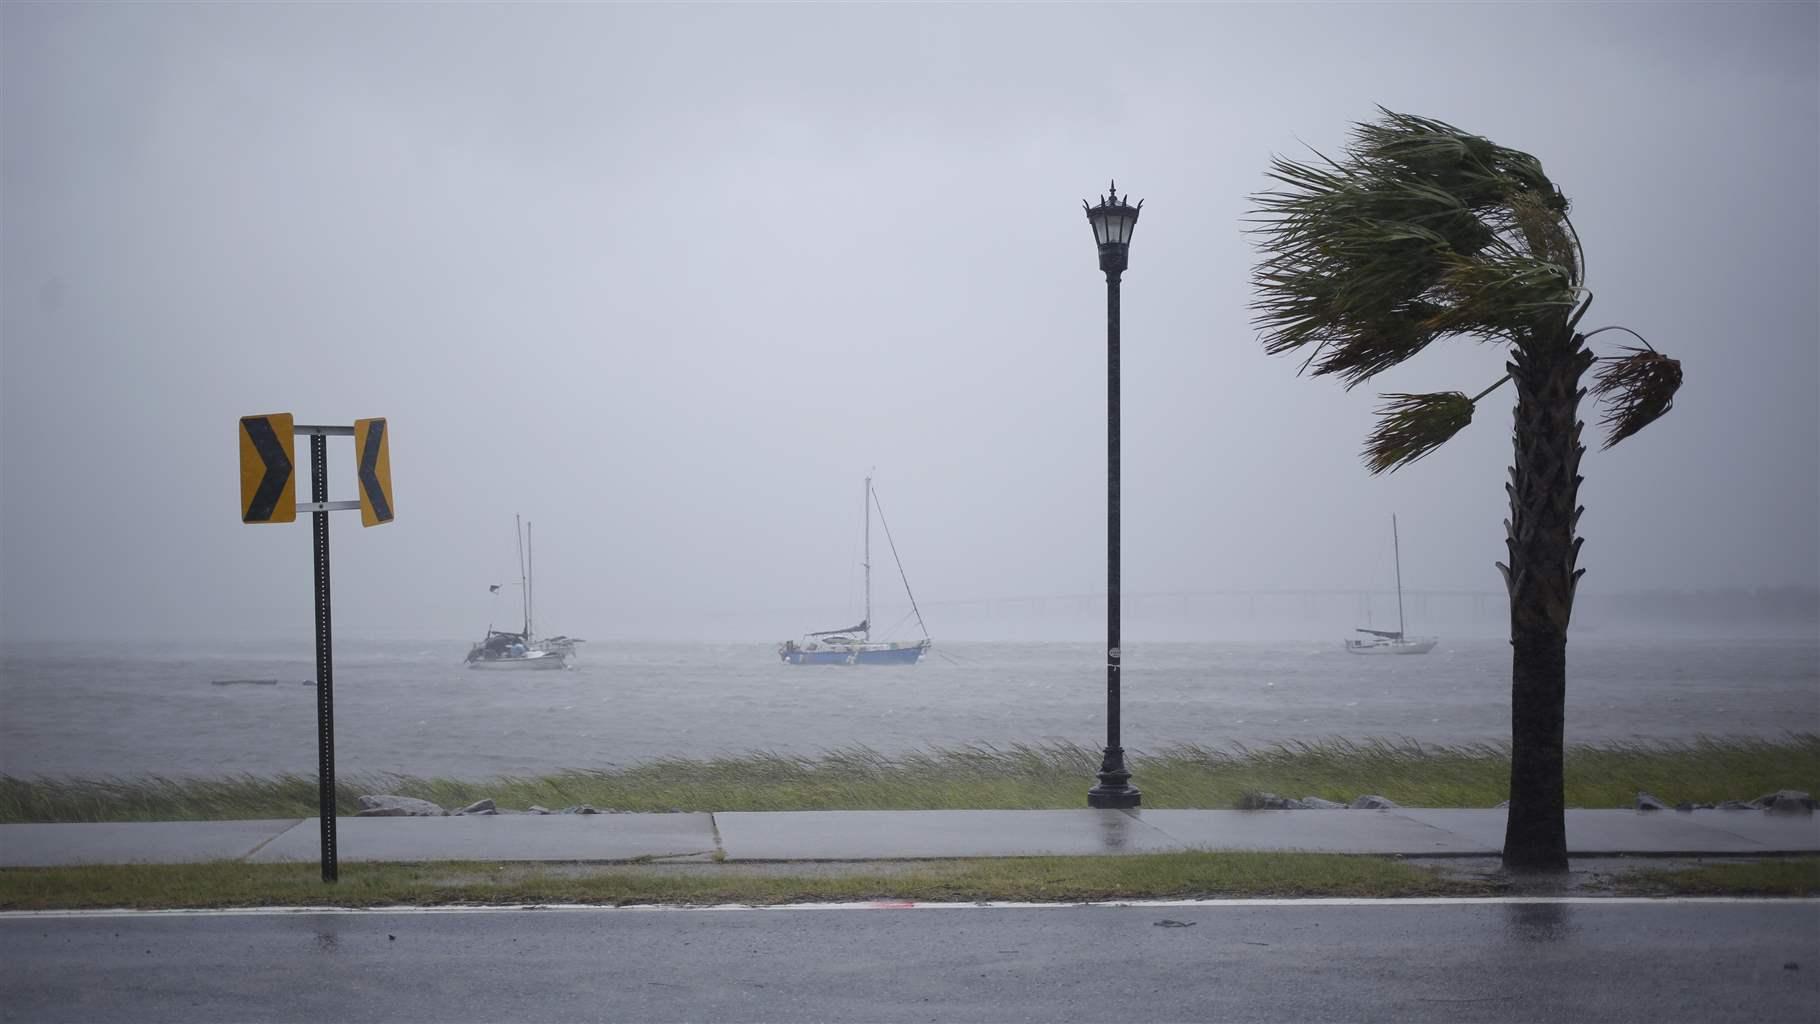  View from the street of three sailboats on the water during a hurricane. A sidewalk runs along the shore and a wind-blown palm tree is on the right.